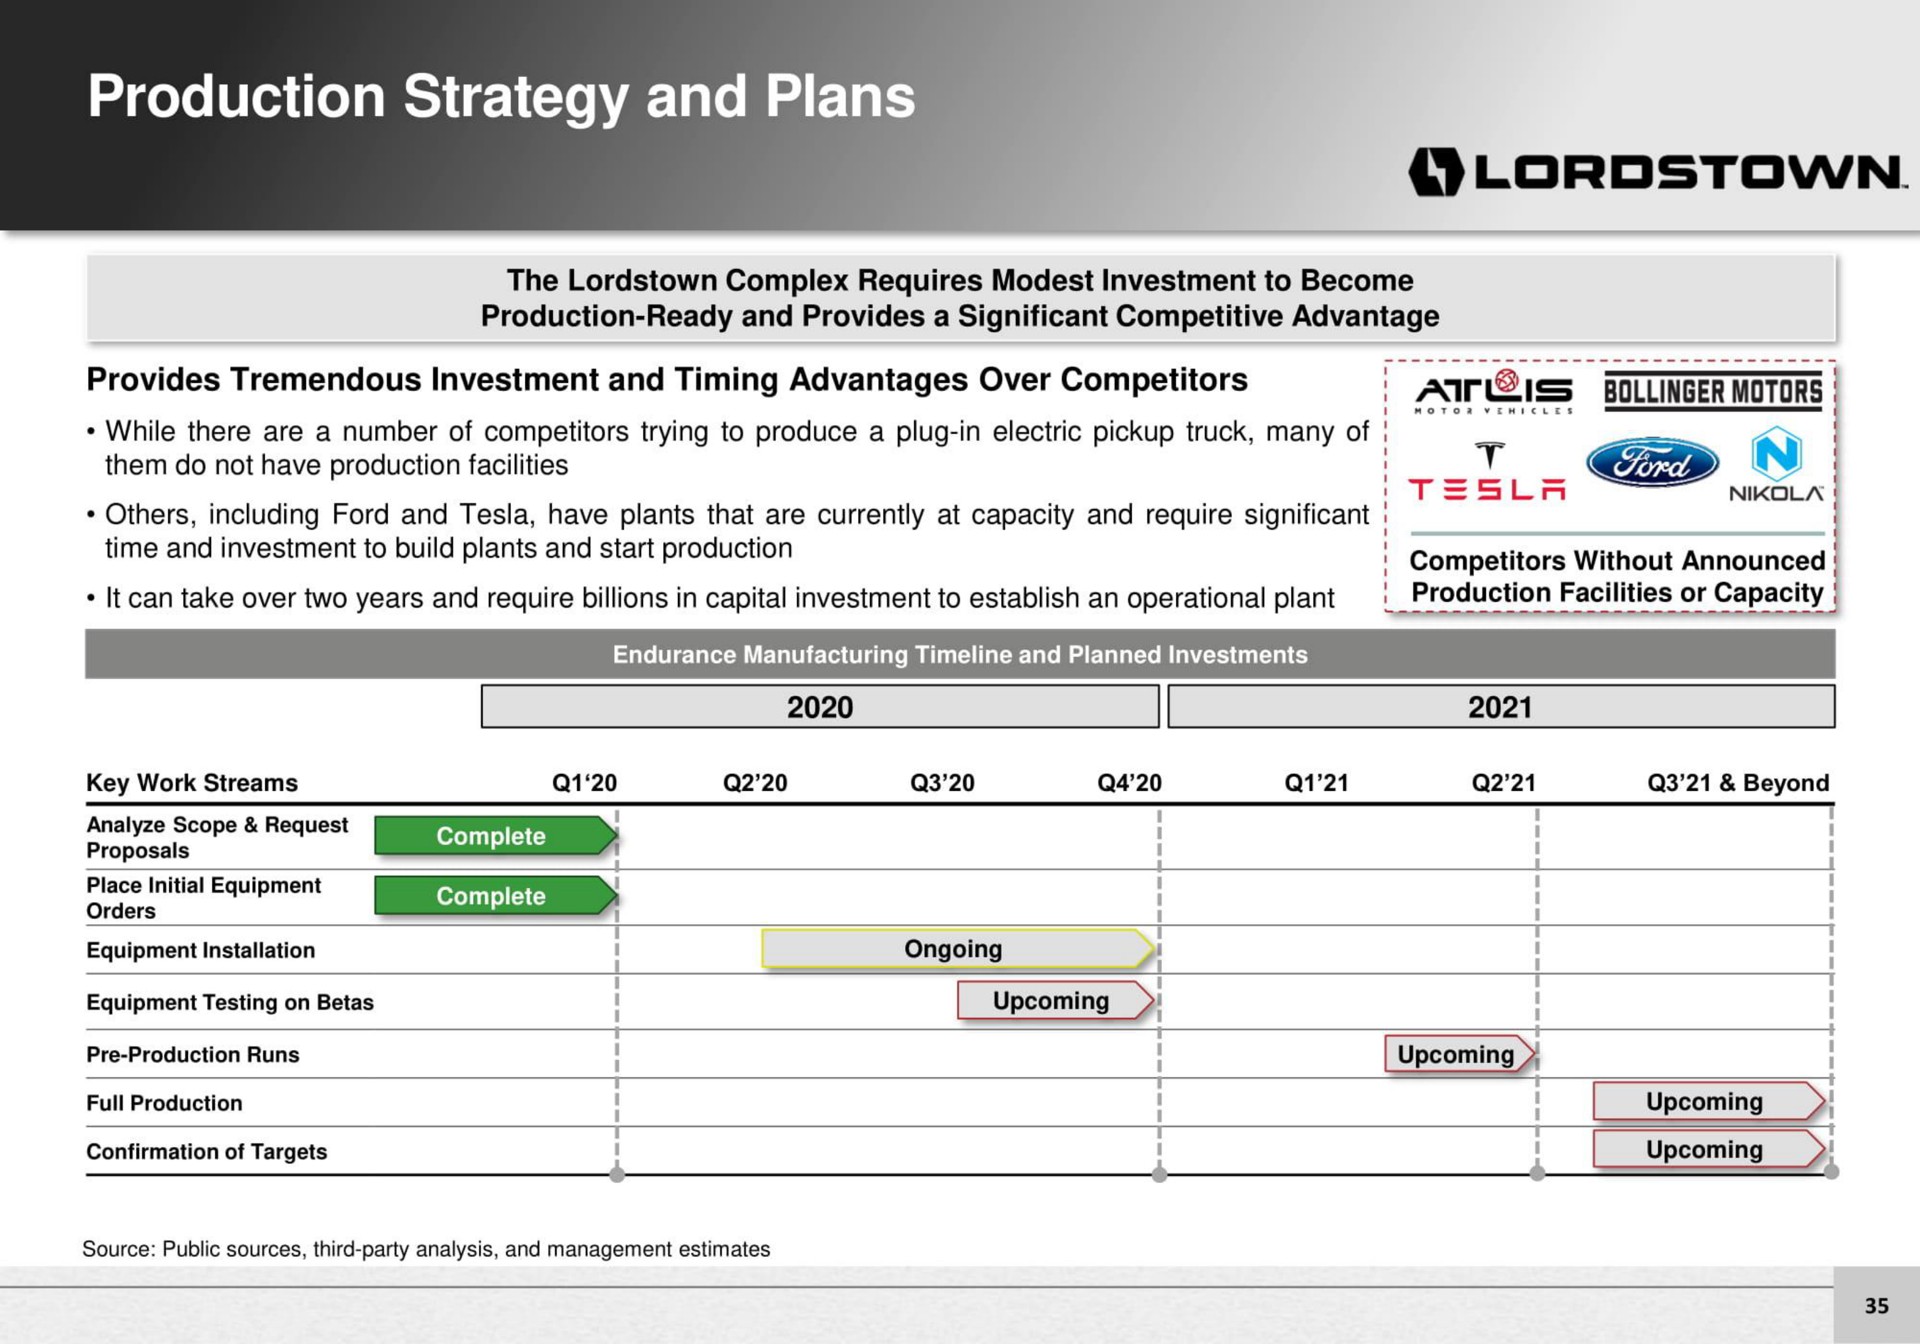 production strategy and plans | Lordstown Motors